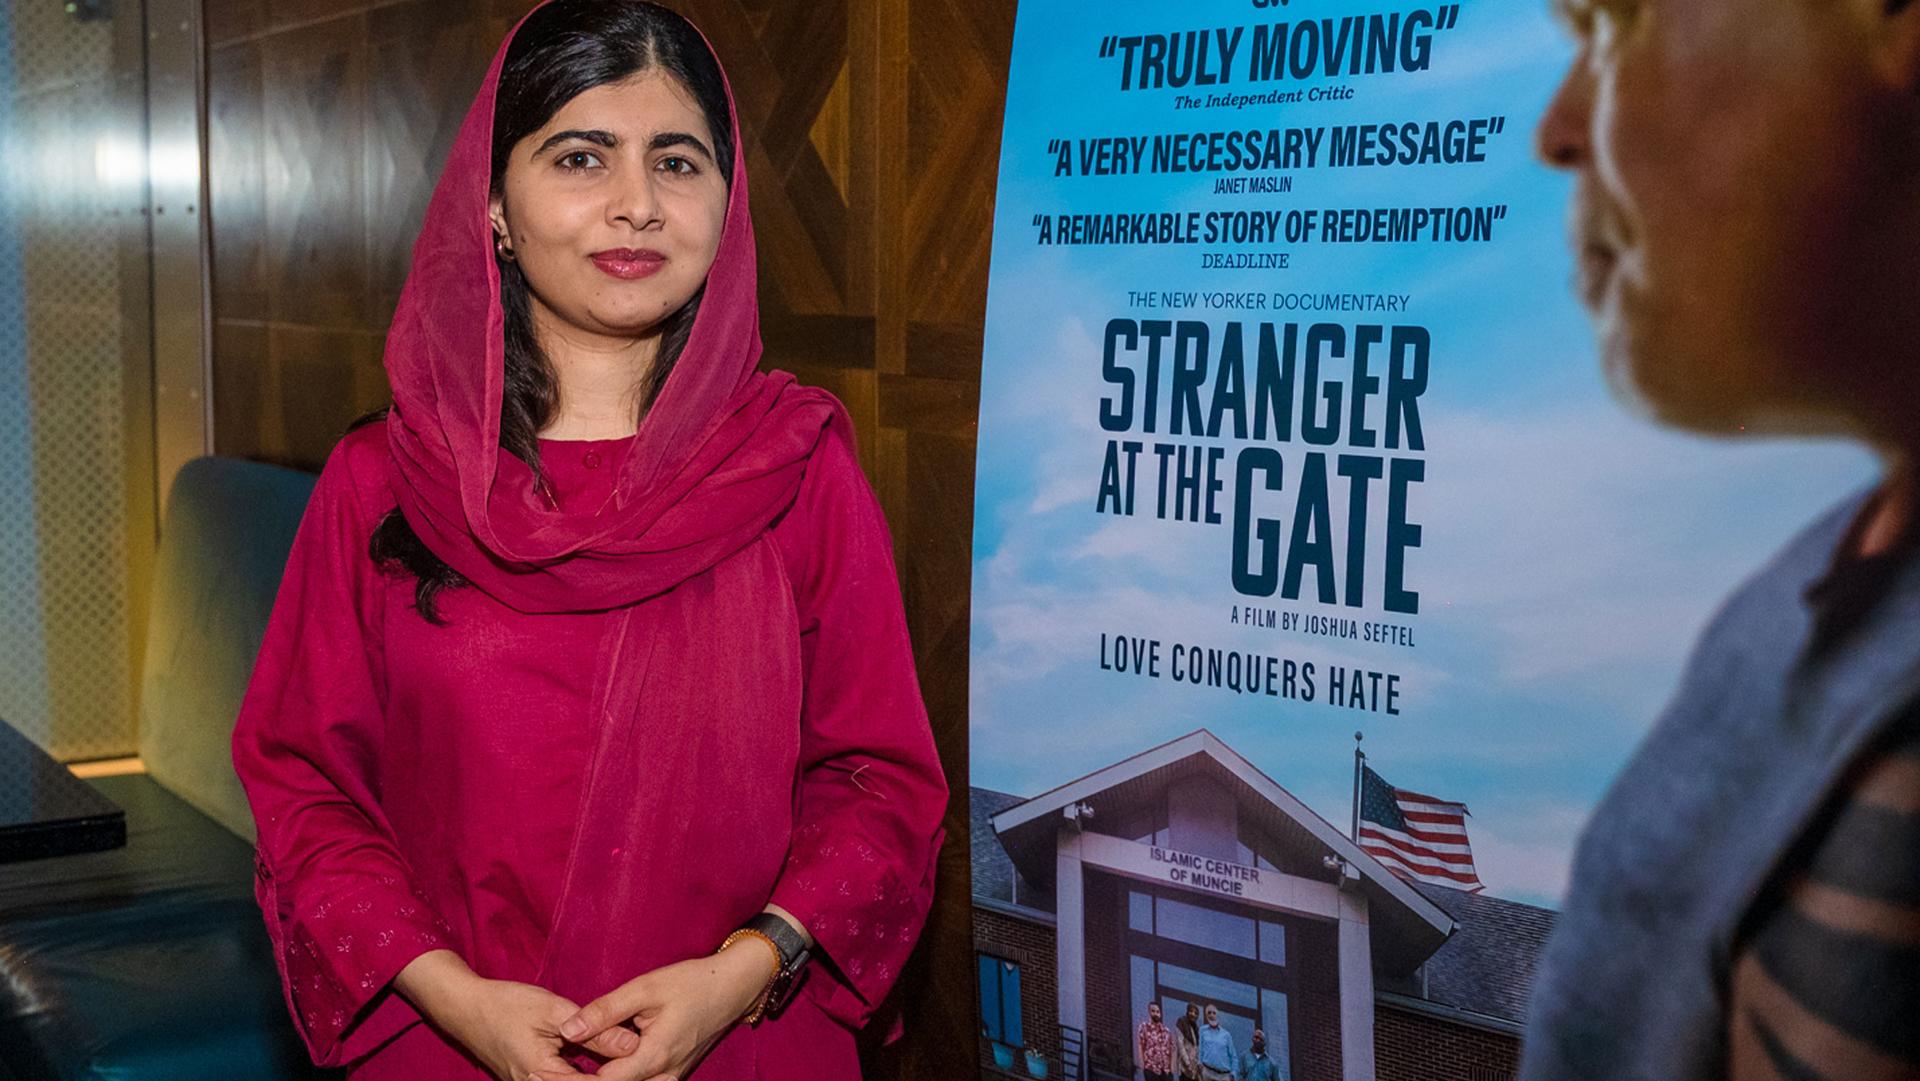 Malala Yousafzai pointing at a poster advertisement of her documentary, "Stranger at the Gate."